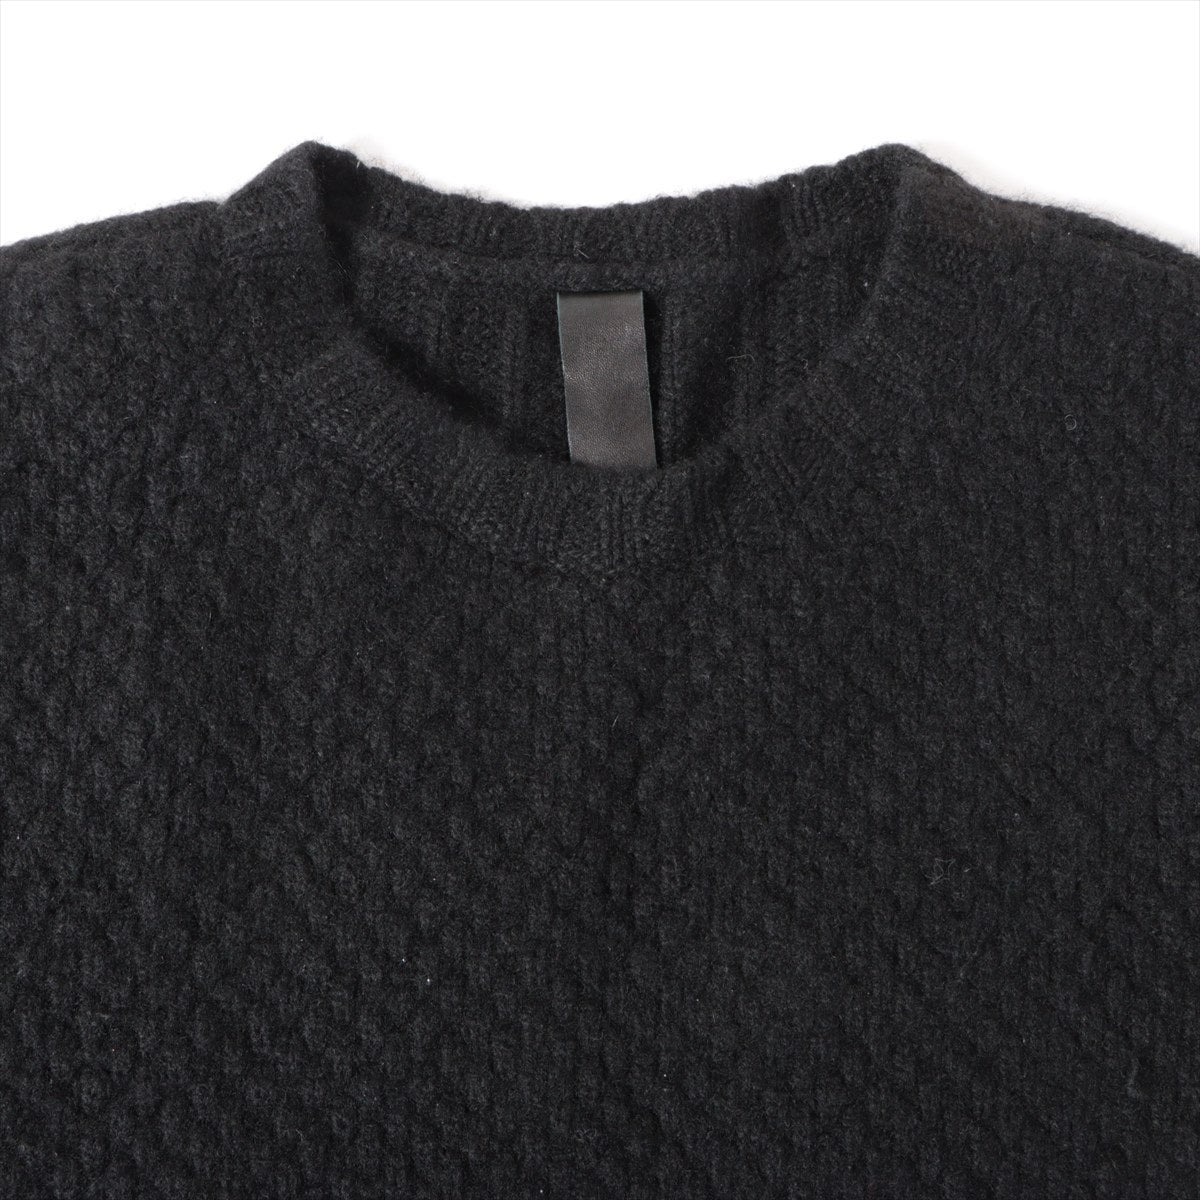 Chrome Hearts Knit Cashmere size S Black with cross patch